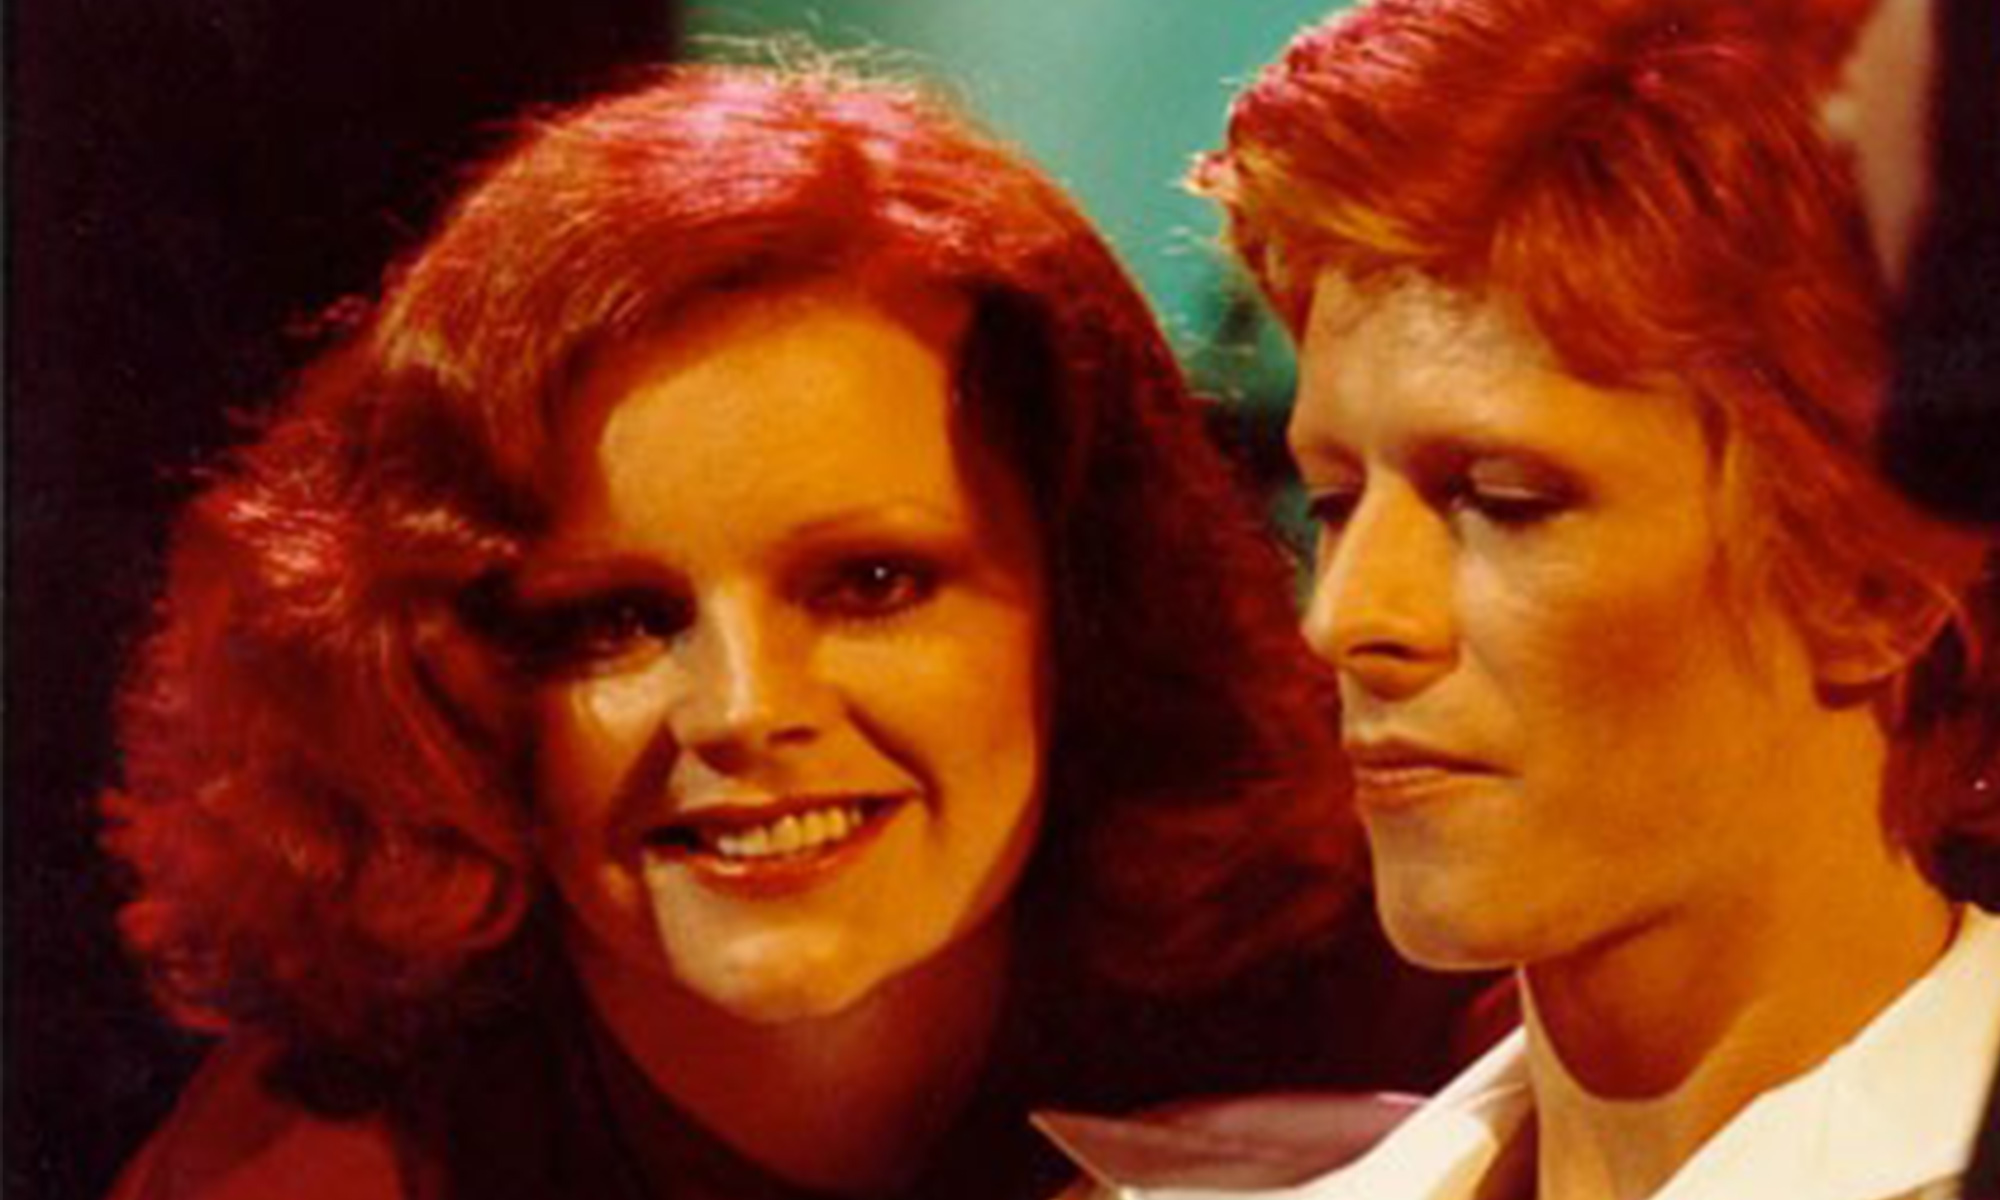 Cherry and David Bowie